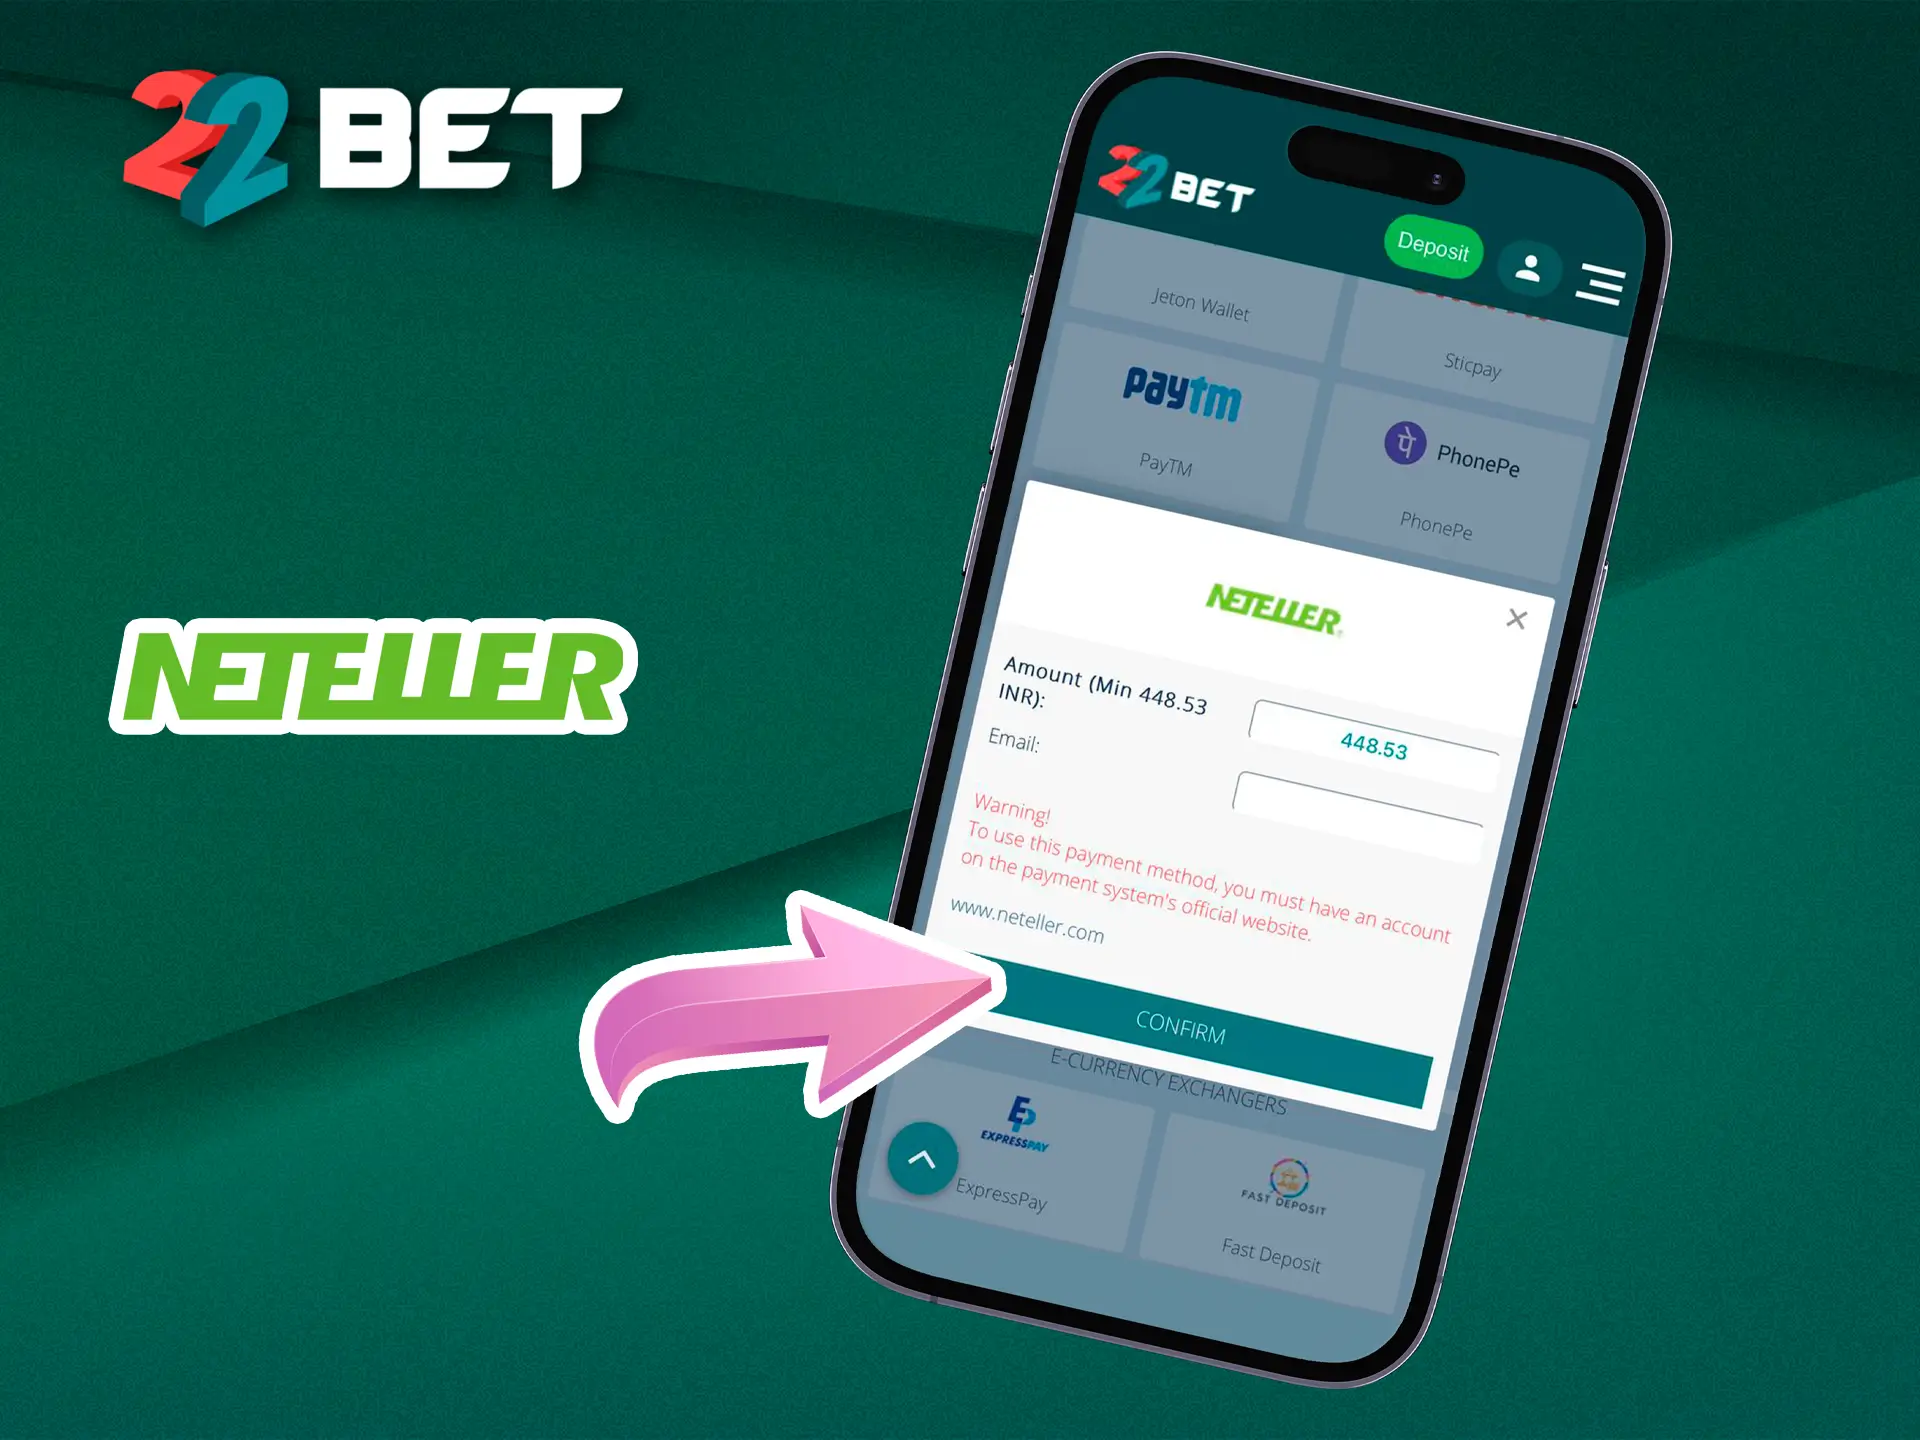 At 22Bet you will always be able to withdraw your funds safely thanks to Neteller.